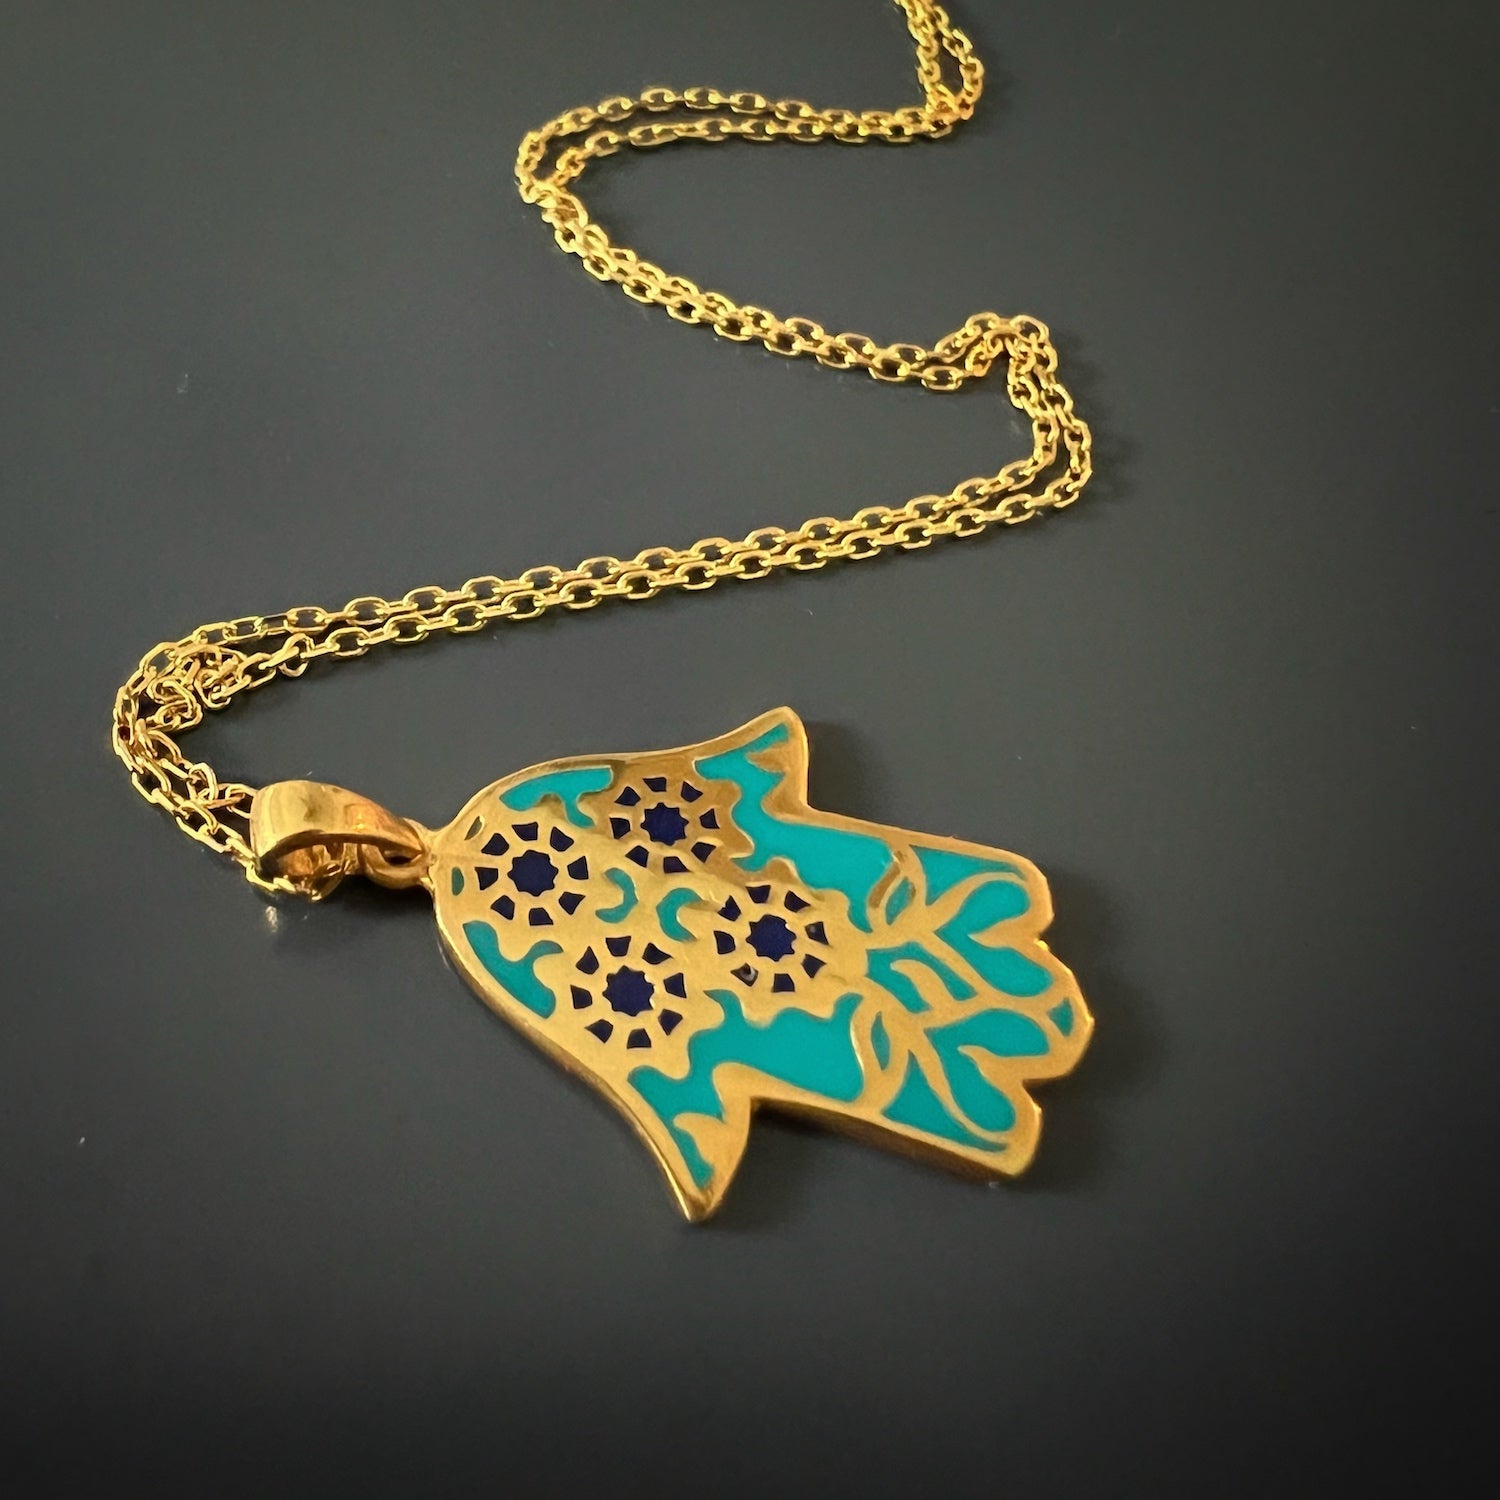 The Good Vibes Enamel Hamsa Necklace, a meaningful accessory radiating positivity.